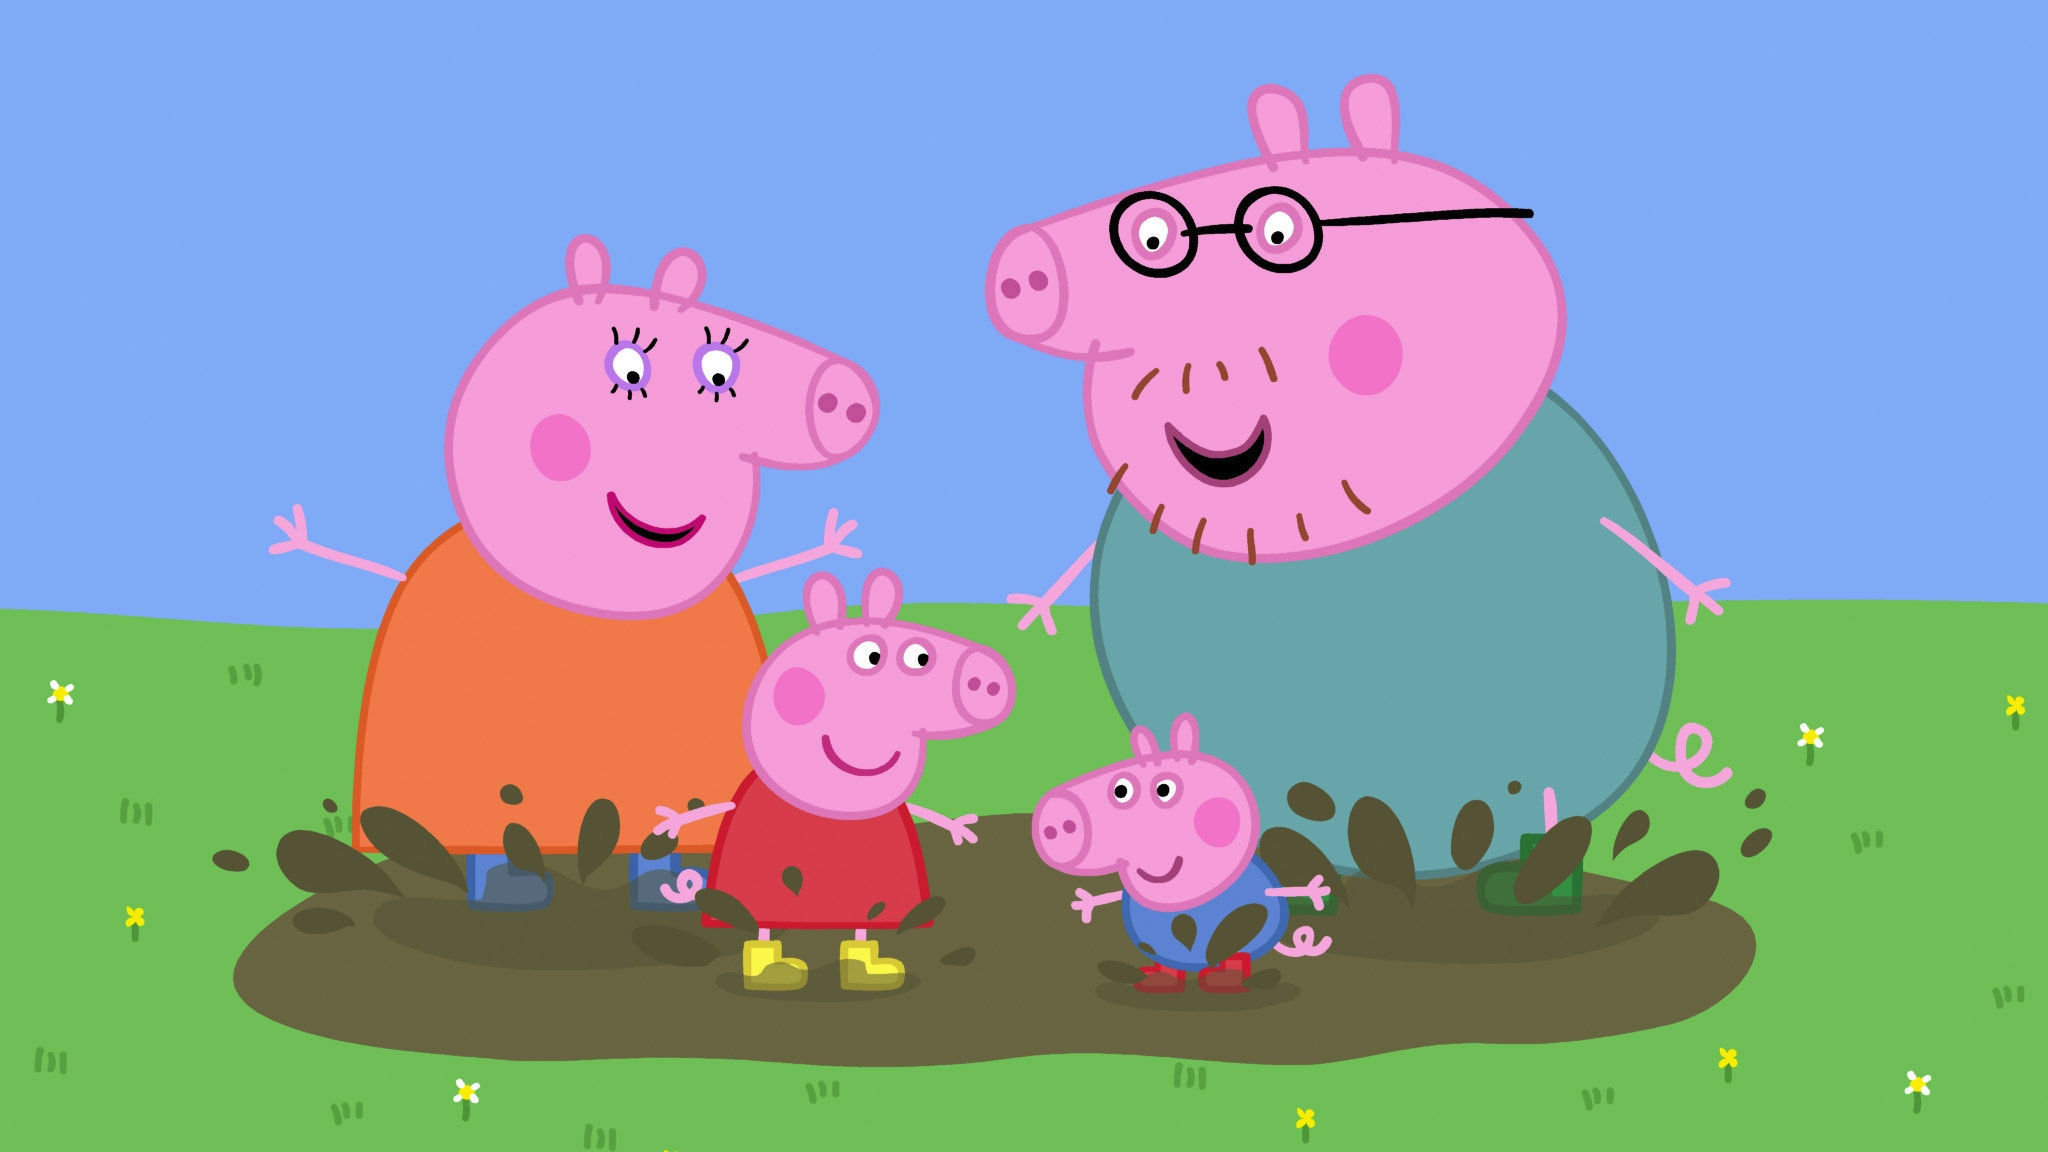 Movie fan theories  - peppa pig family - re E